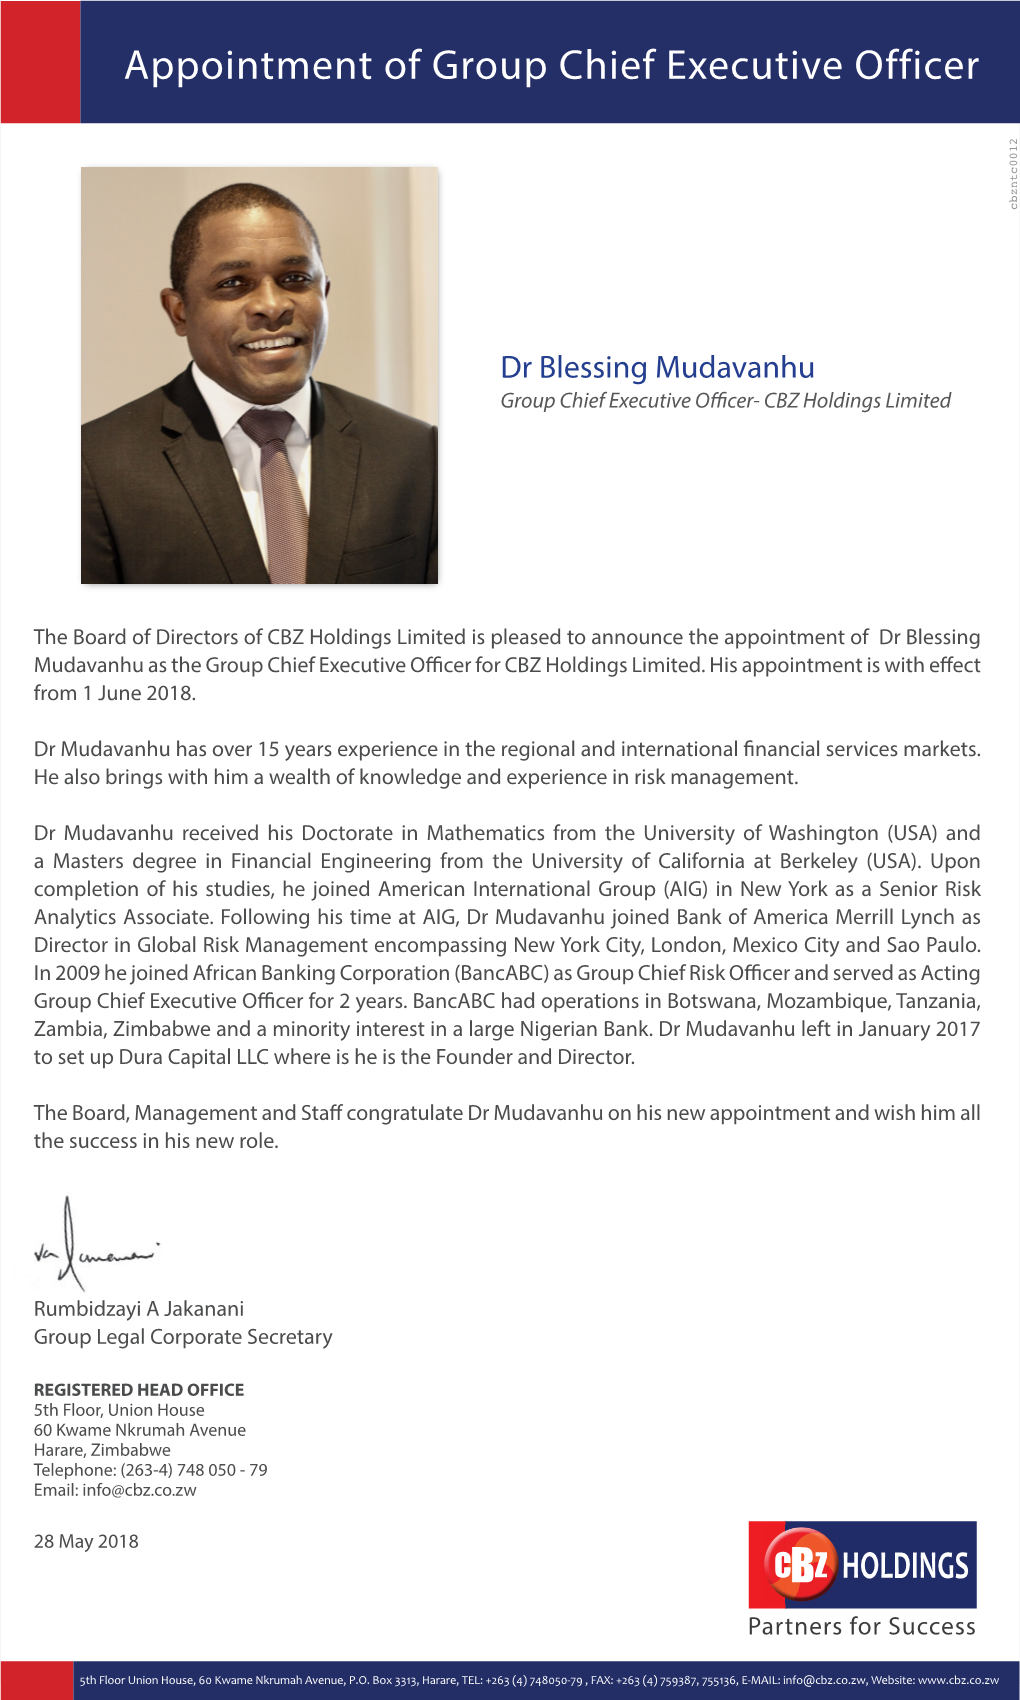 Appointment of Group Chief Executive Officer